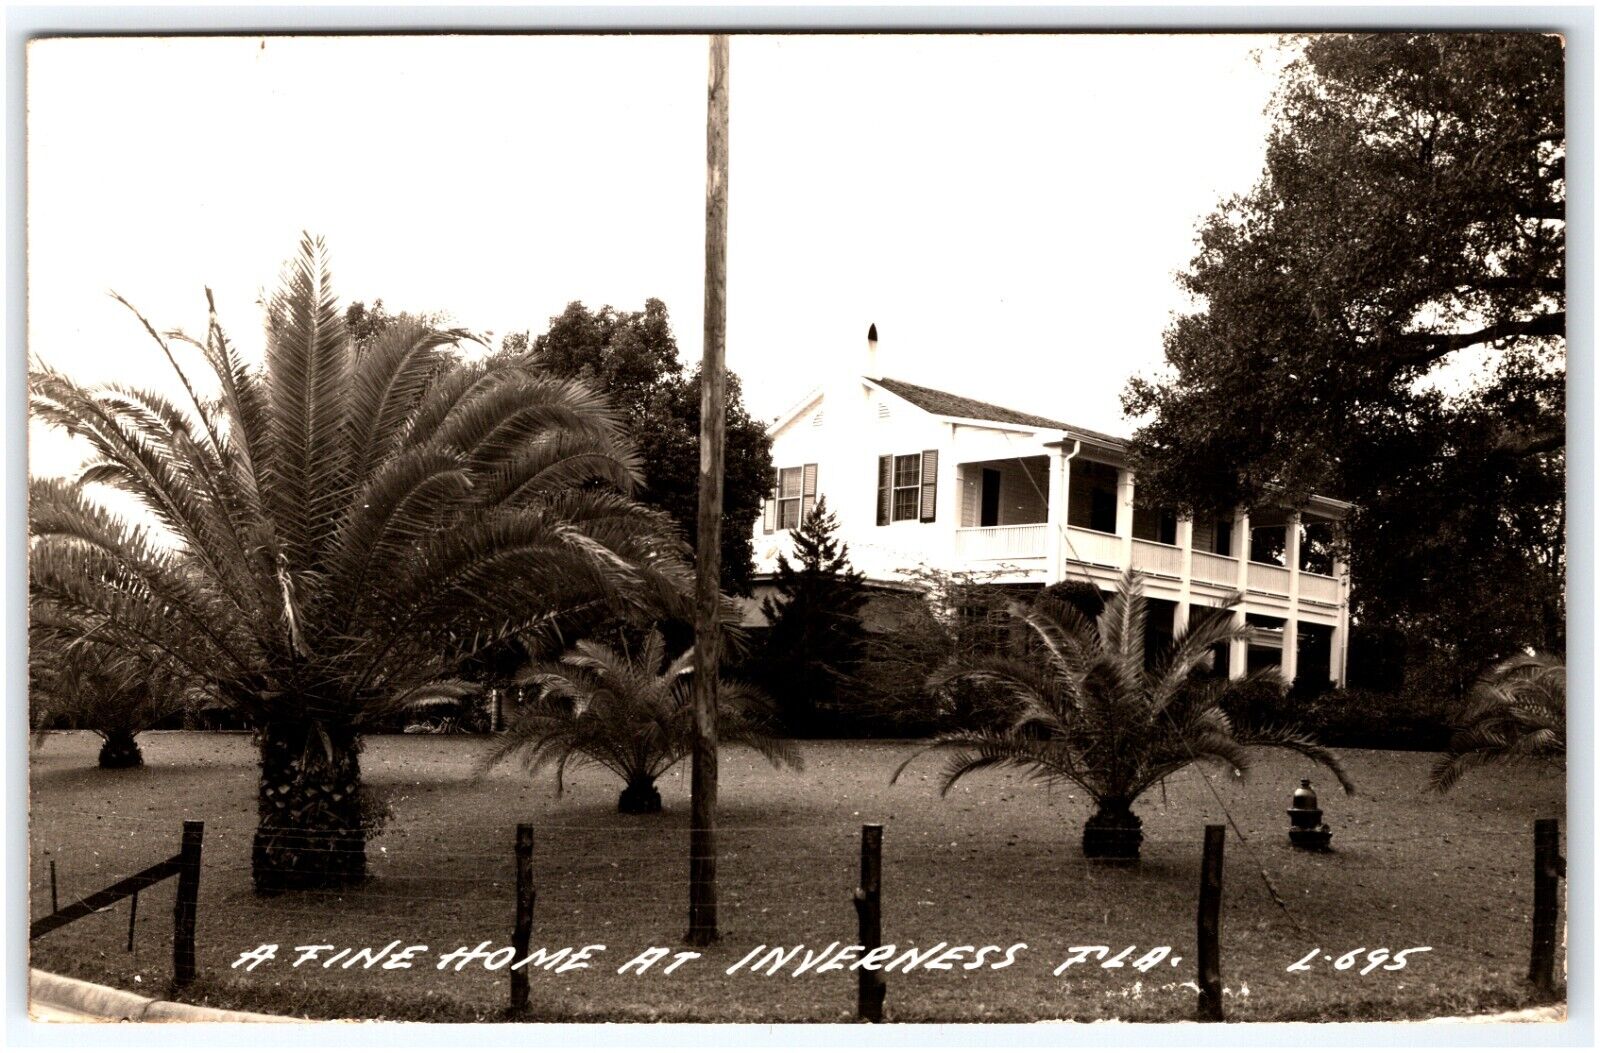 RPPC A FINE HOME AT INVERNESS FLORIDA PALM TREES POSTCARD